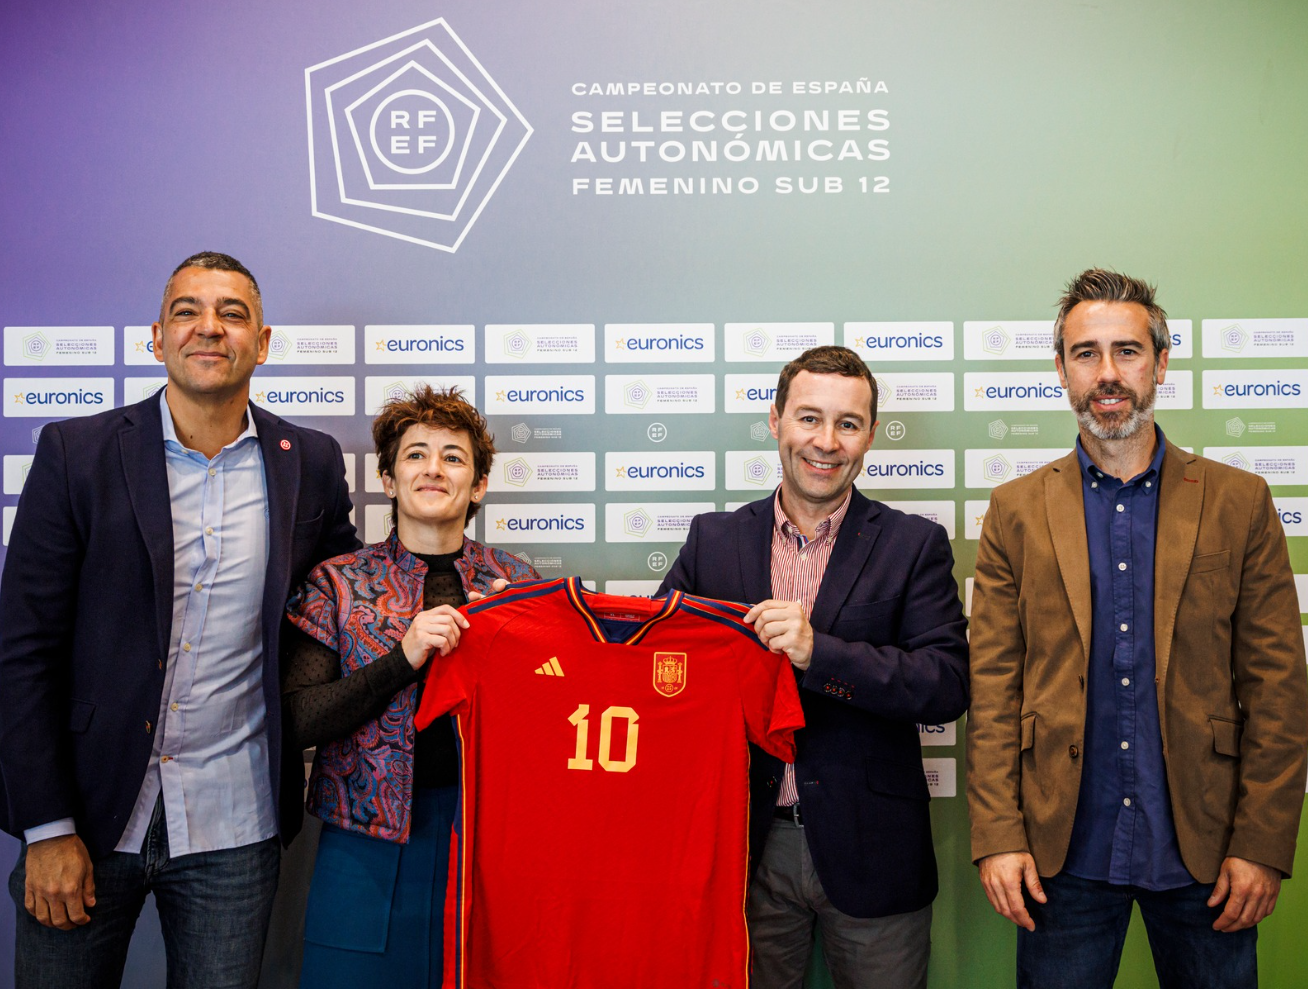 Euronics' Sponsorship of UEFA Women's Football: Celebrating a Thrilling second Season and Empowering Communities